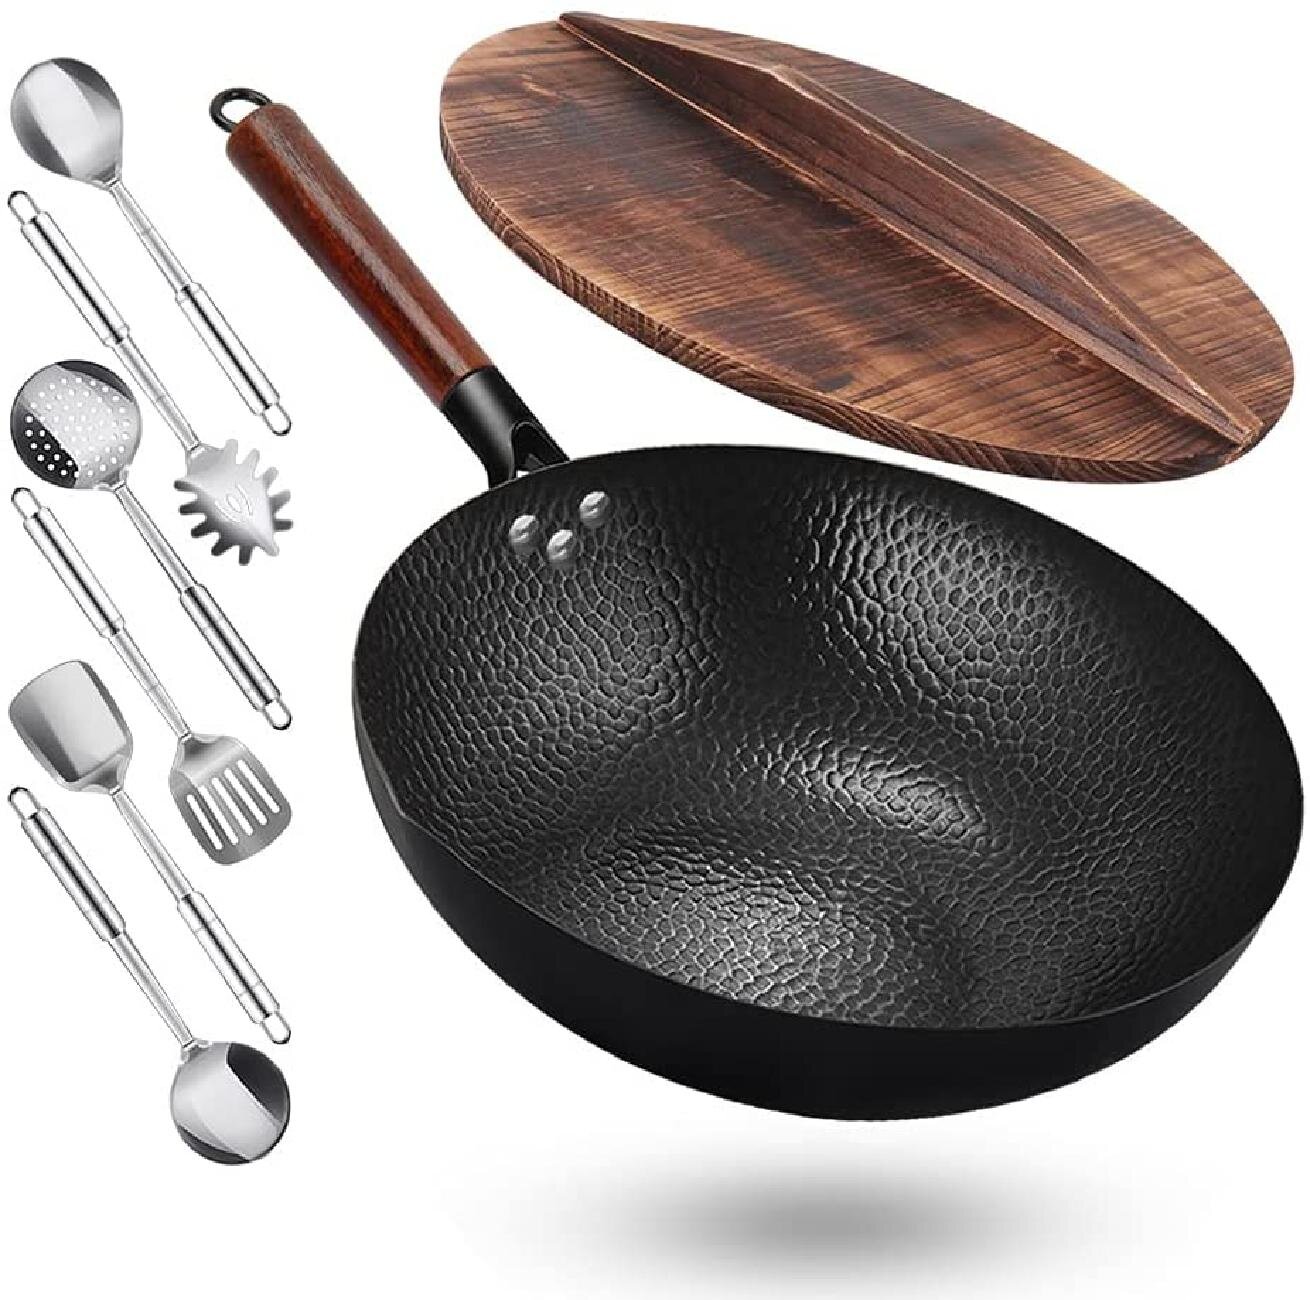 13 WOK Flat Bottom Carbon Steel with Stainless Steel Ladle and Turner 